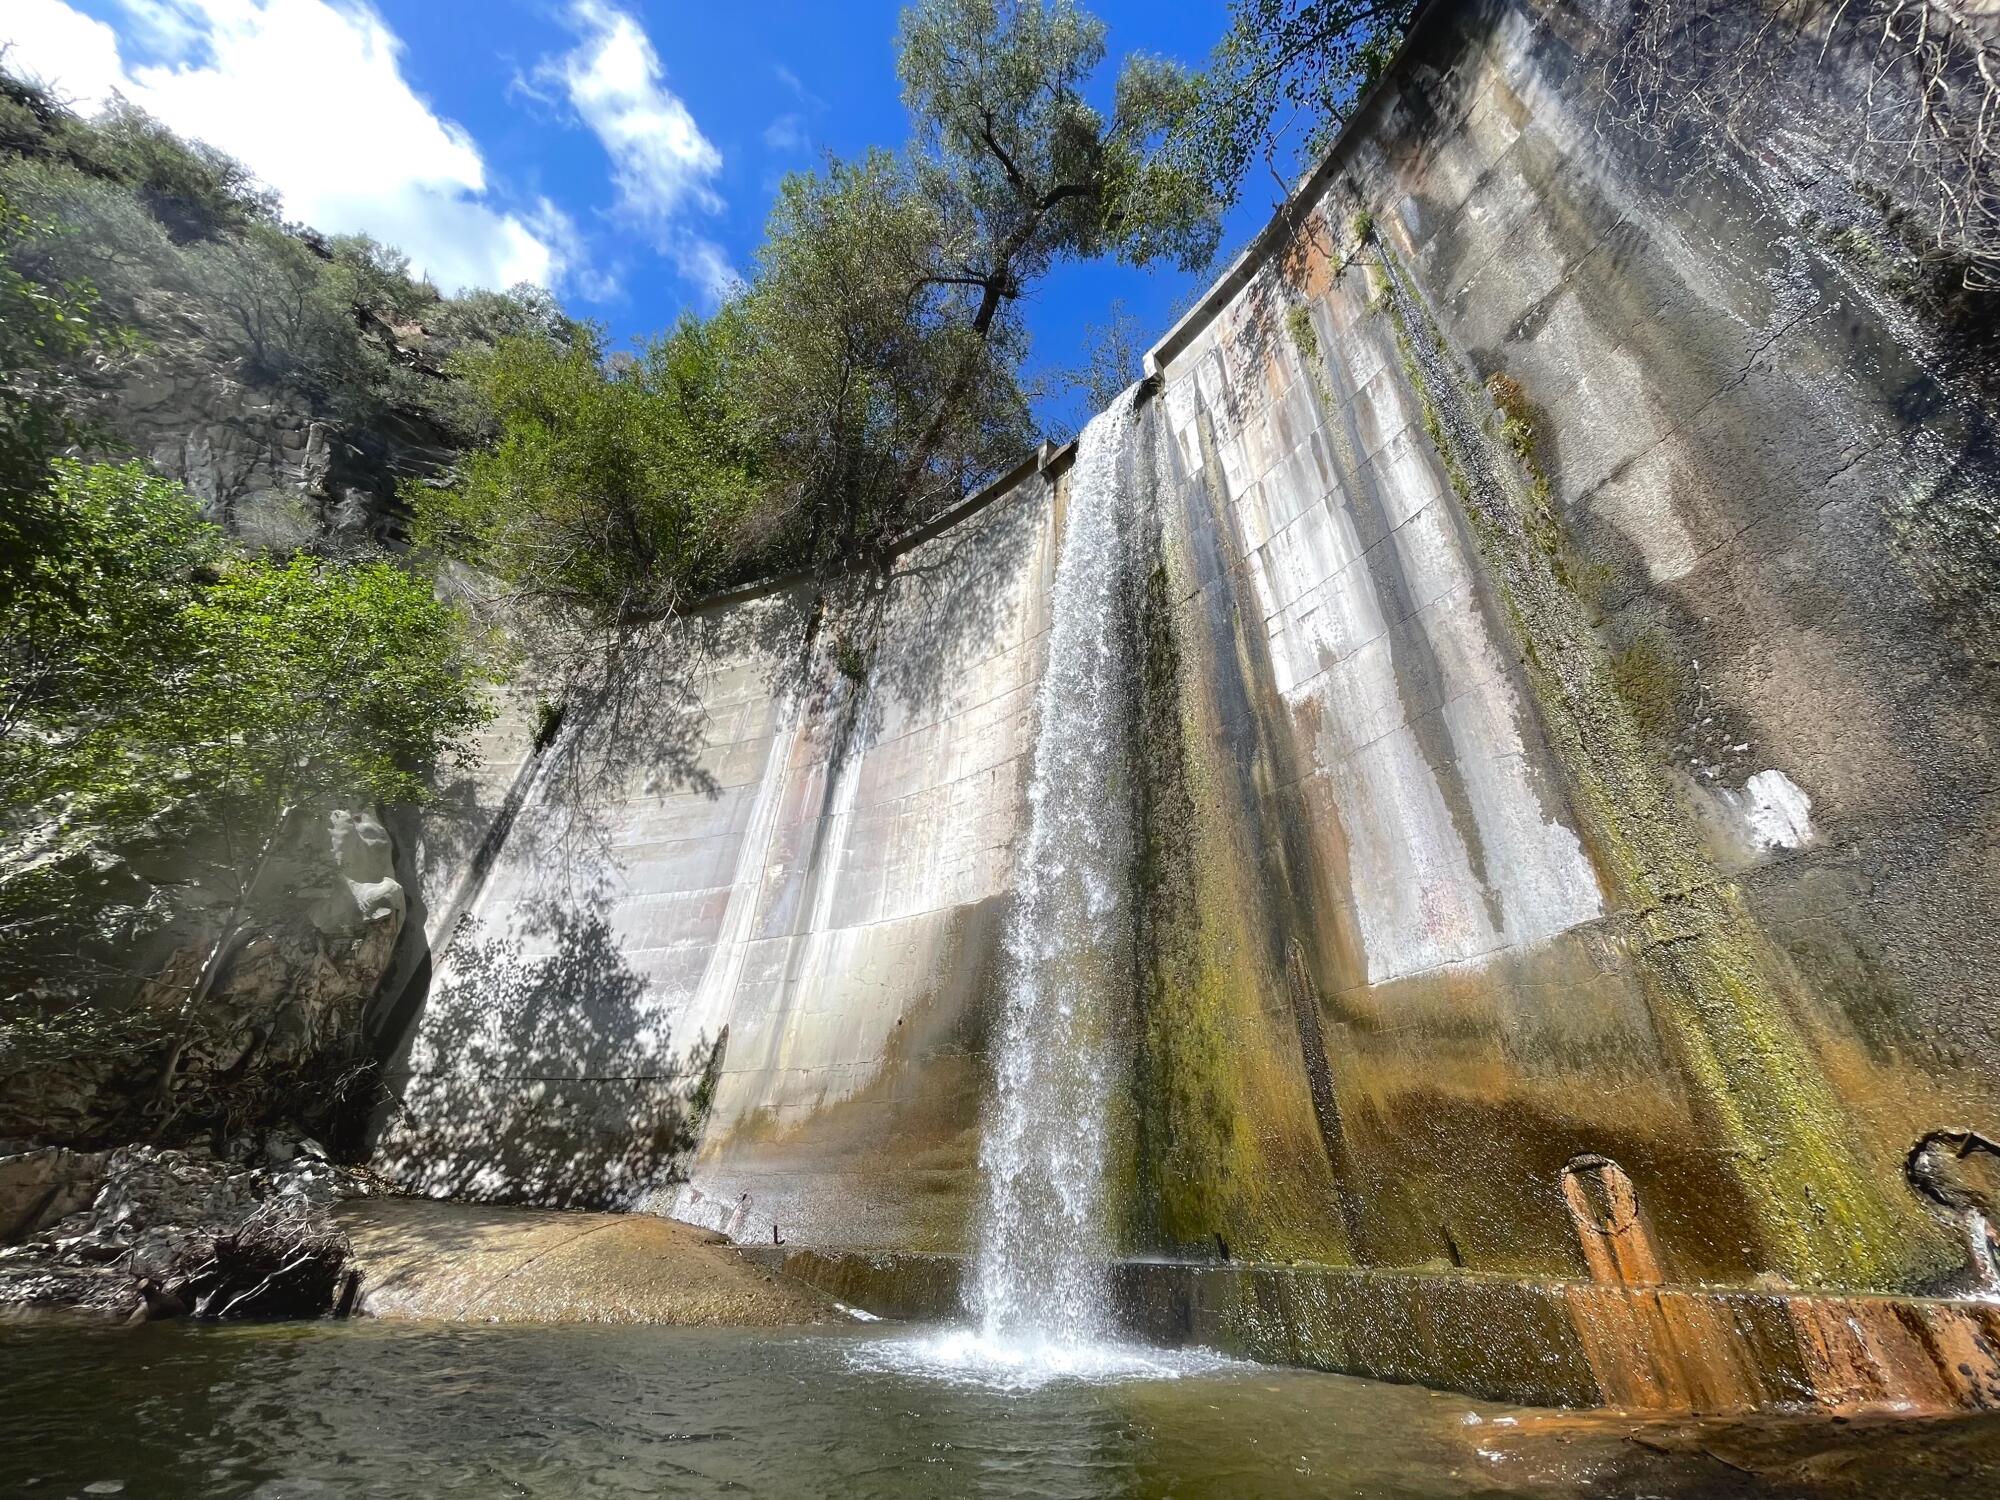 Water cascades over the Brown Mountain Dam, seen from below, with canyon walls and trees rising above it.